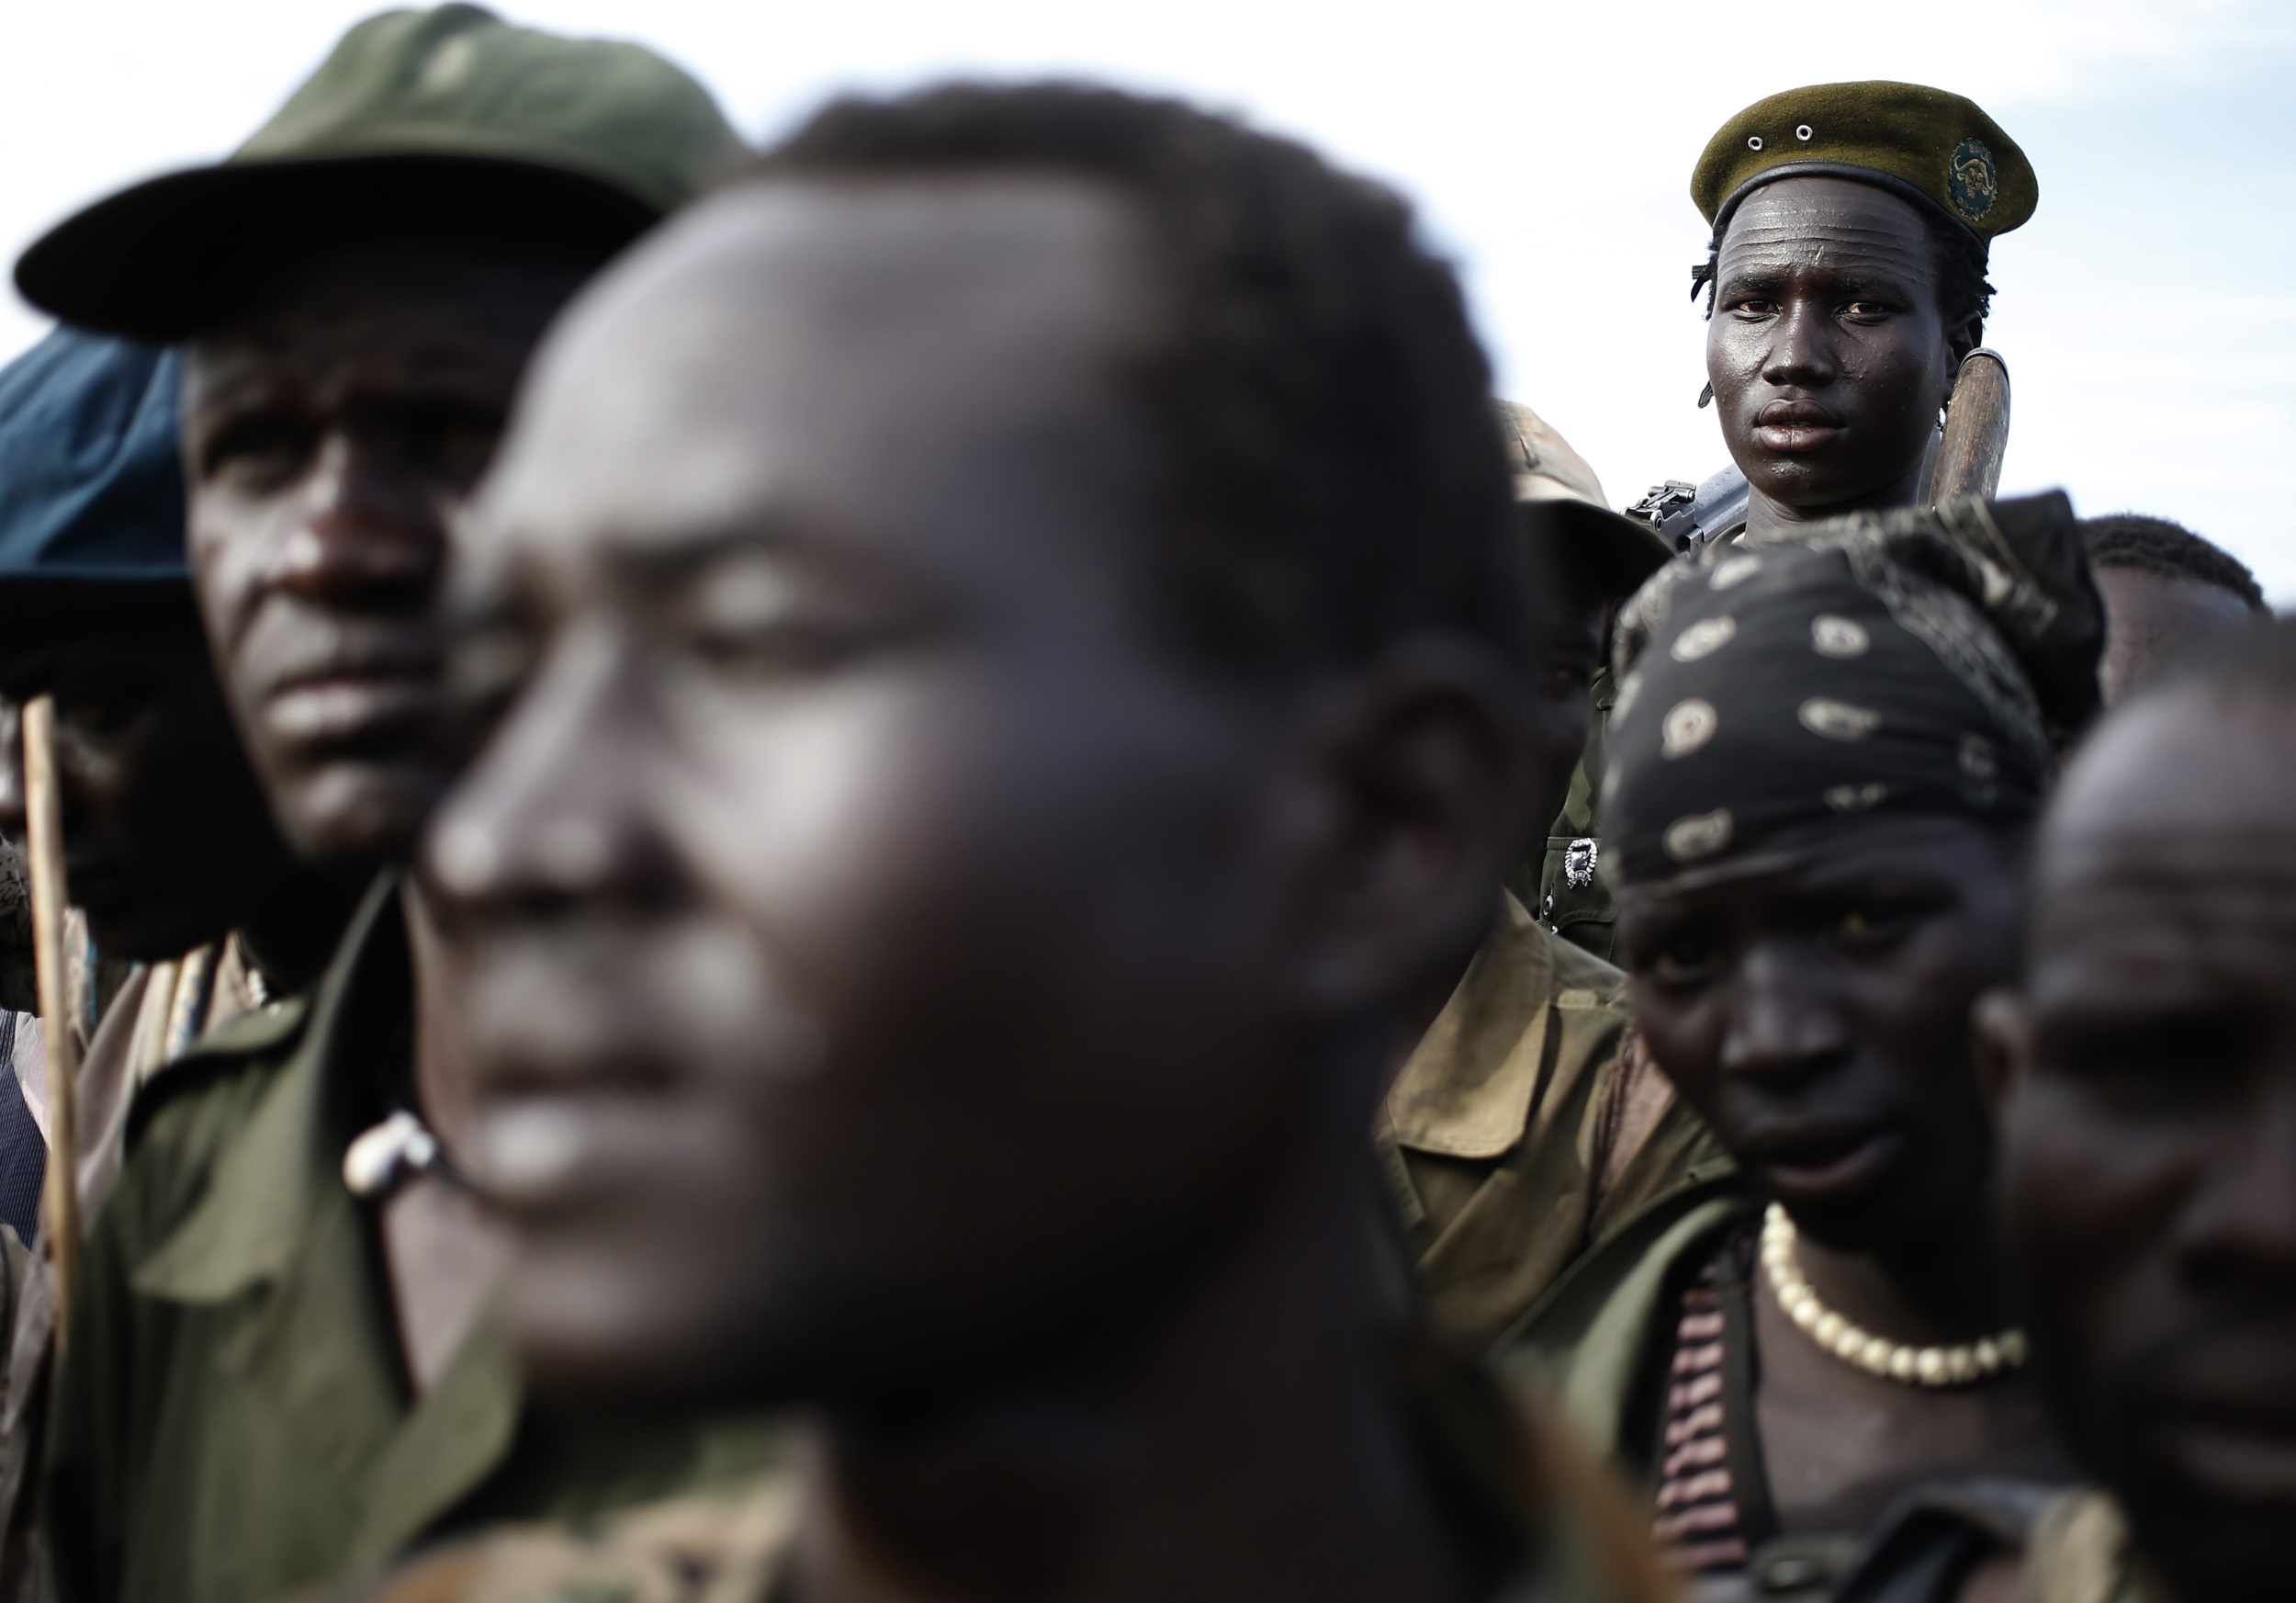 Jikany Nuer White Army fighters walk in a rebel-controlled territory in Upper Nile State, South Sudan, on Feb. 13, 2014. (Goran Tomasevic—Reuters)